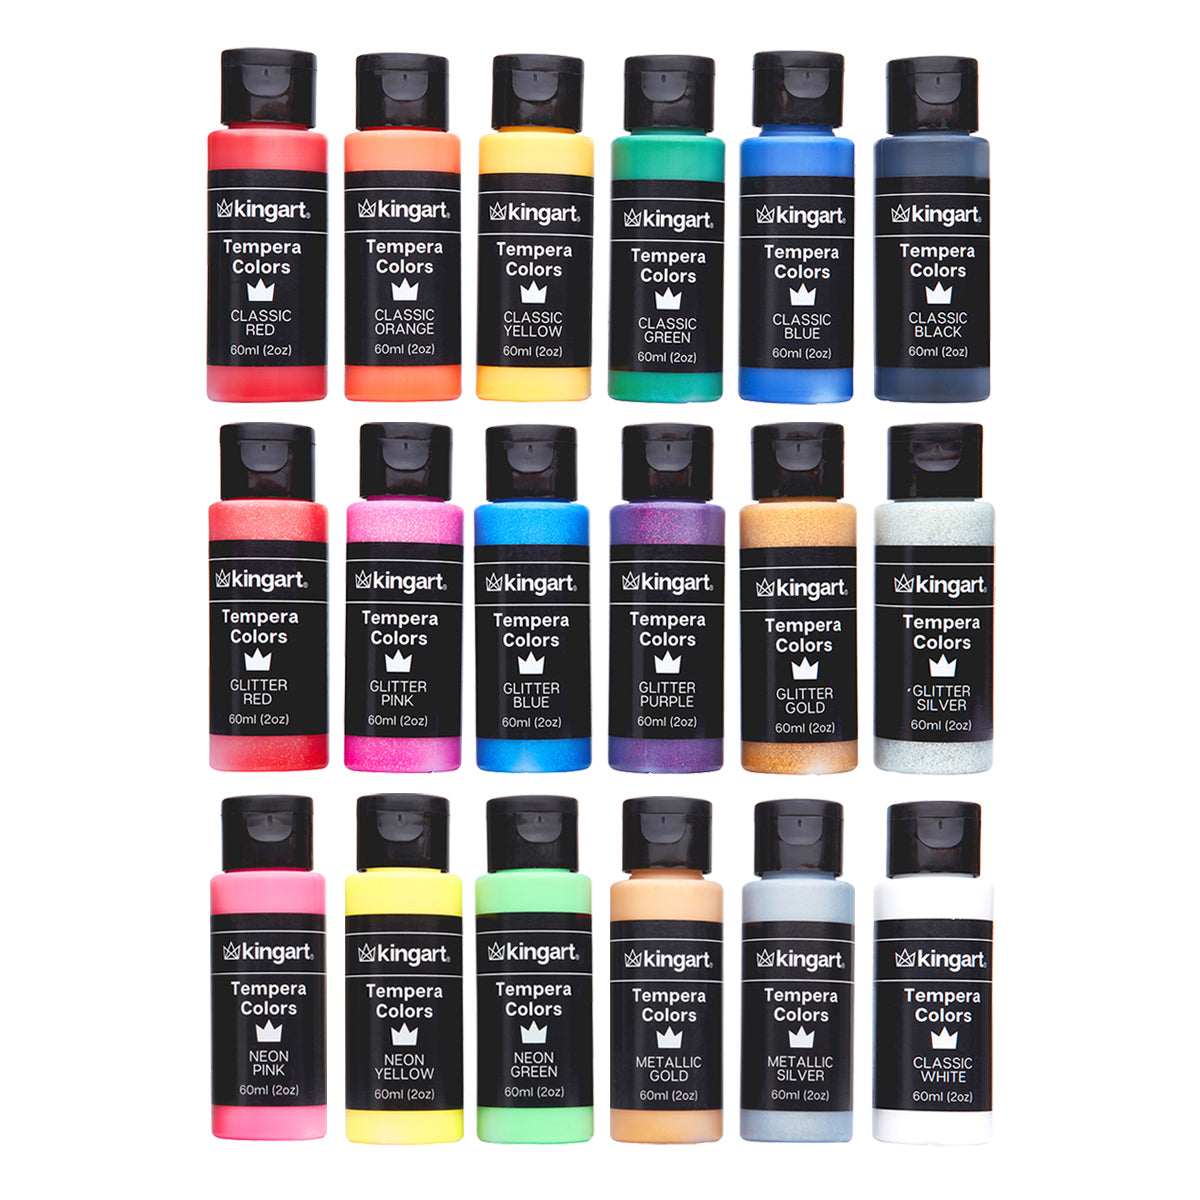 Paint Sets (Acrylic, Tempera and Watercolor)